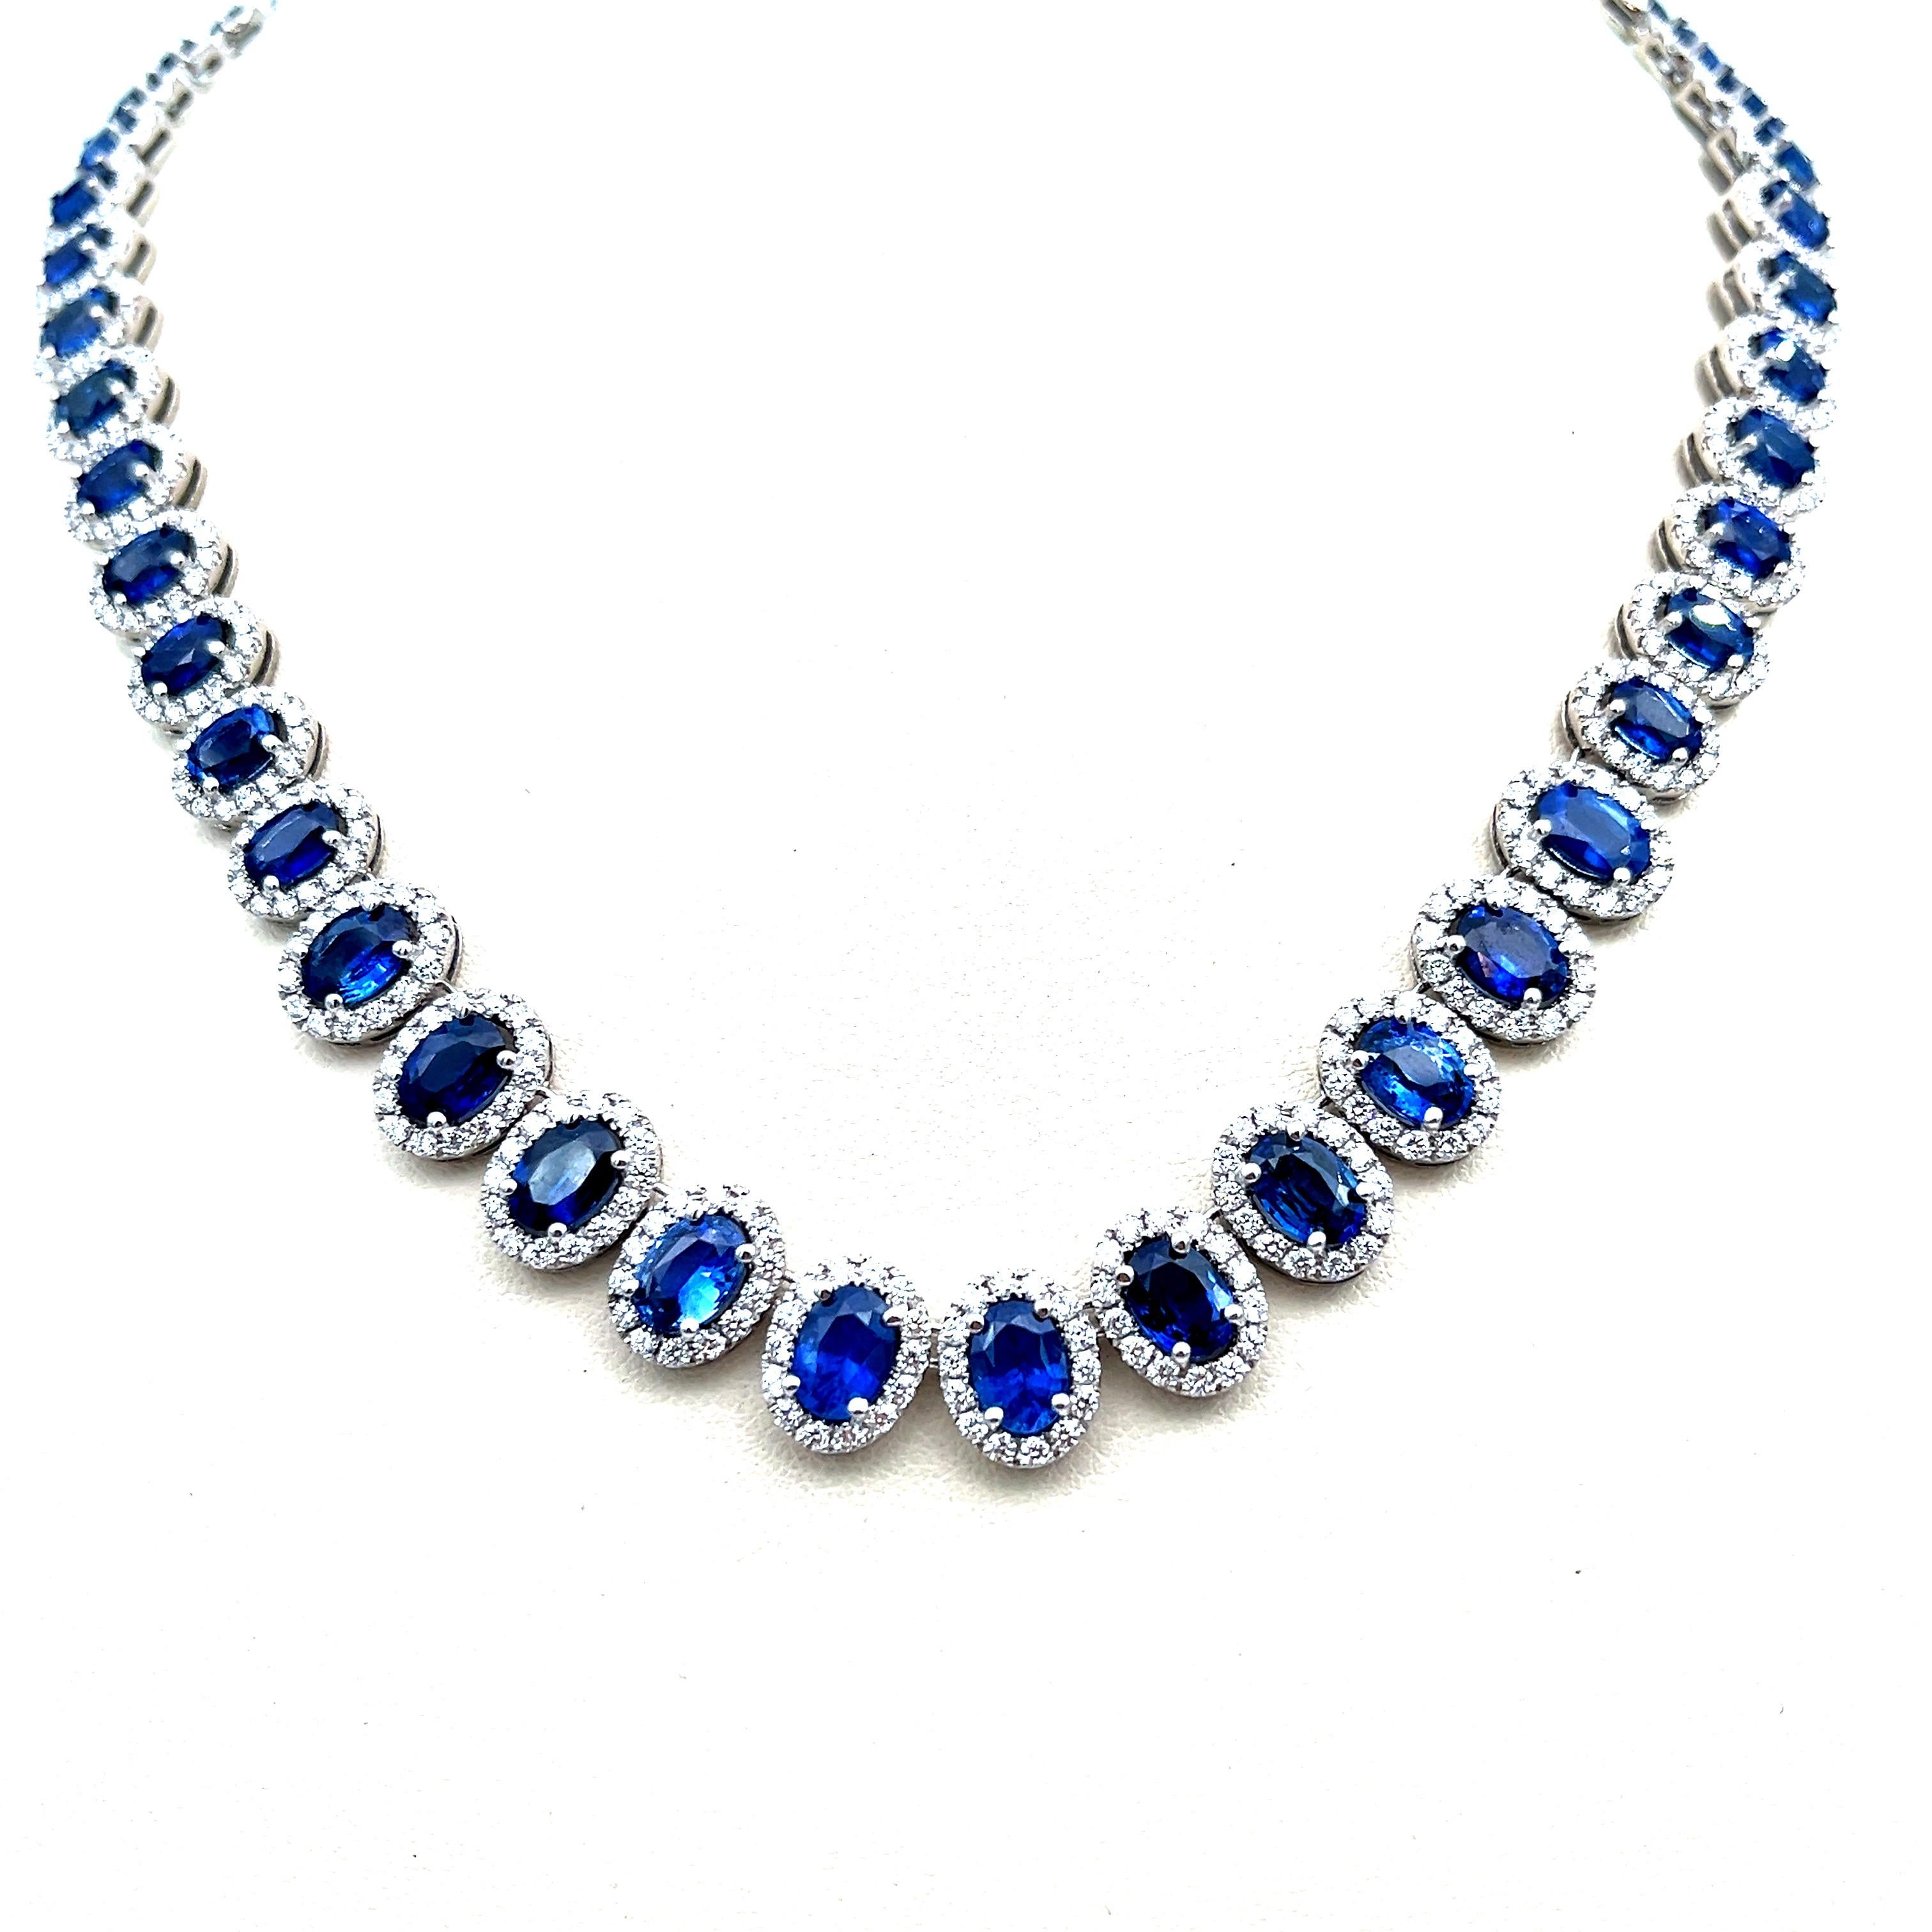 Oval Cut 37.54 ct Natural Sapphire & Diamond Necklace